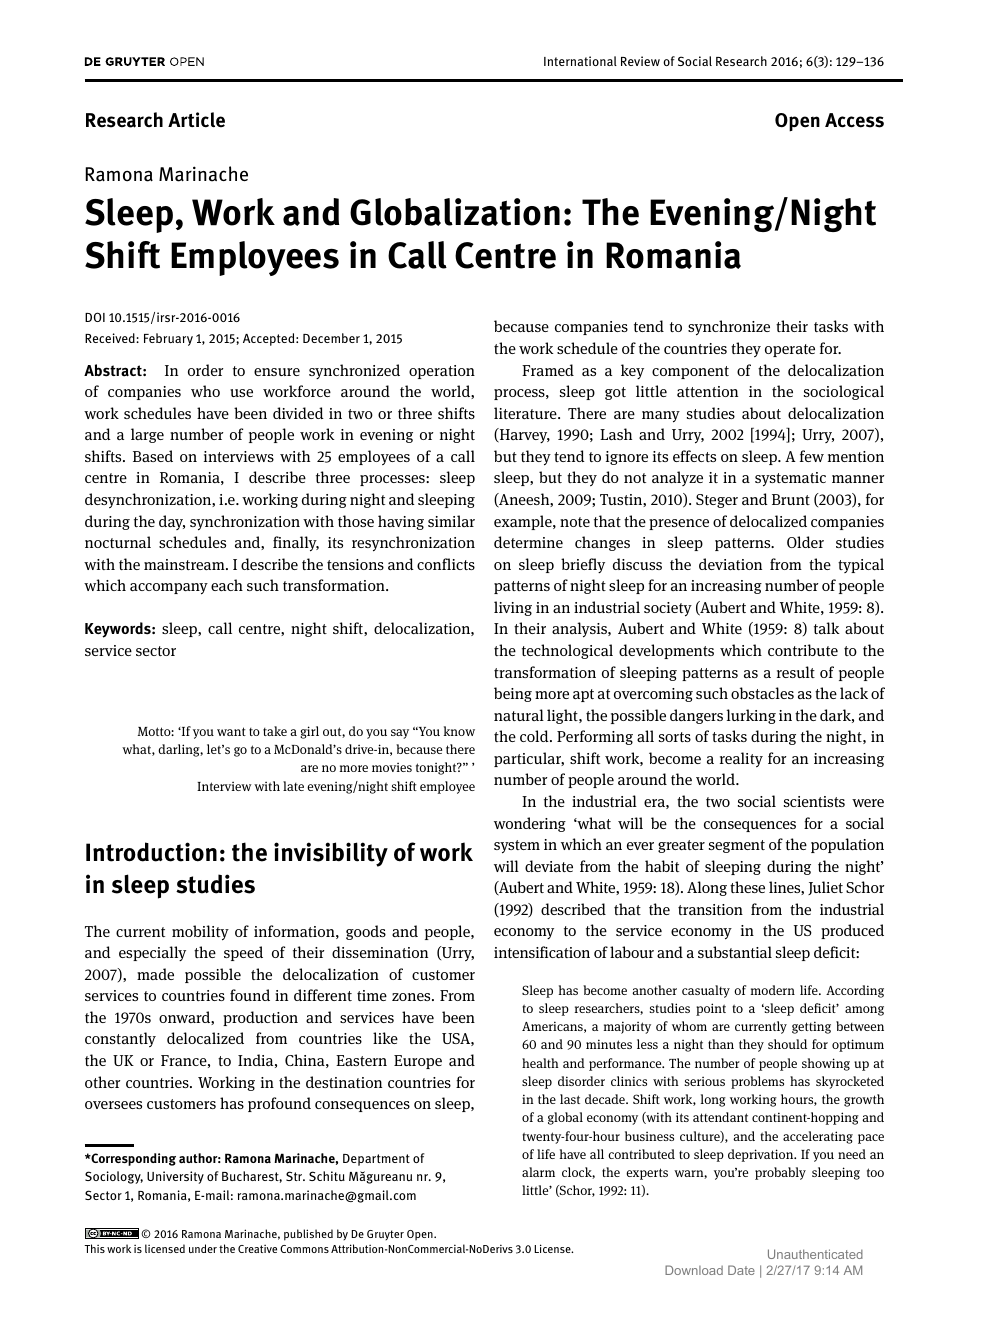 Research Paper On Night Shift Work